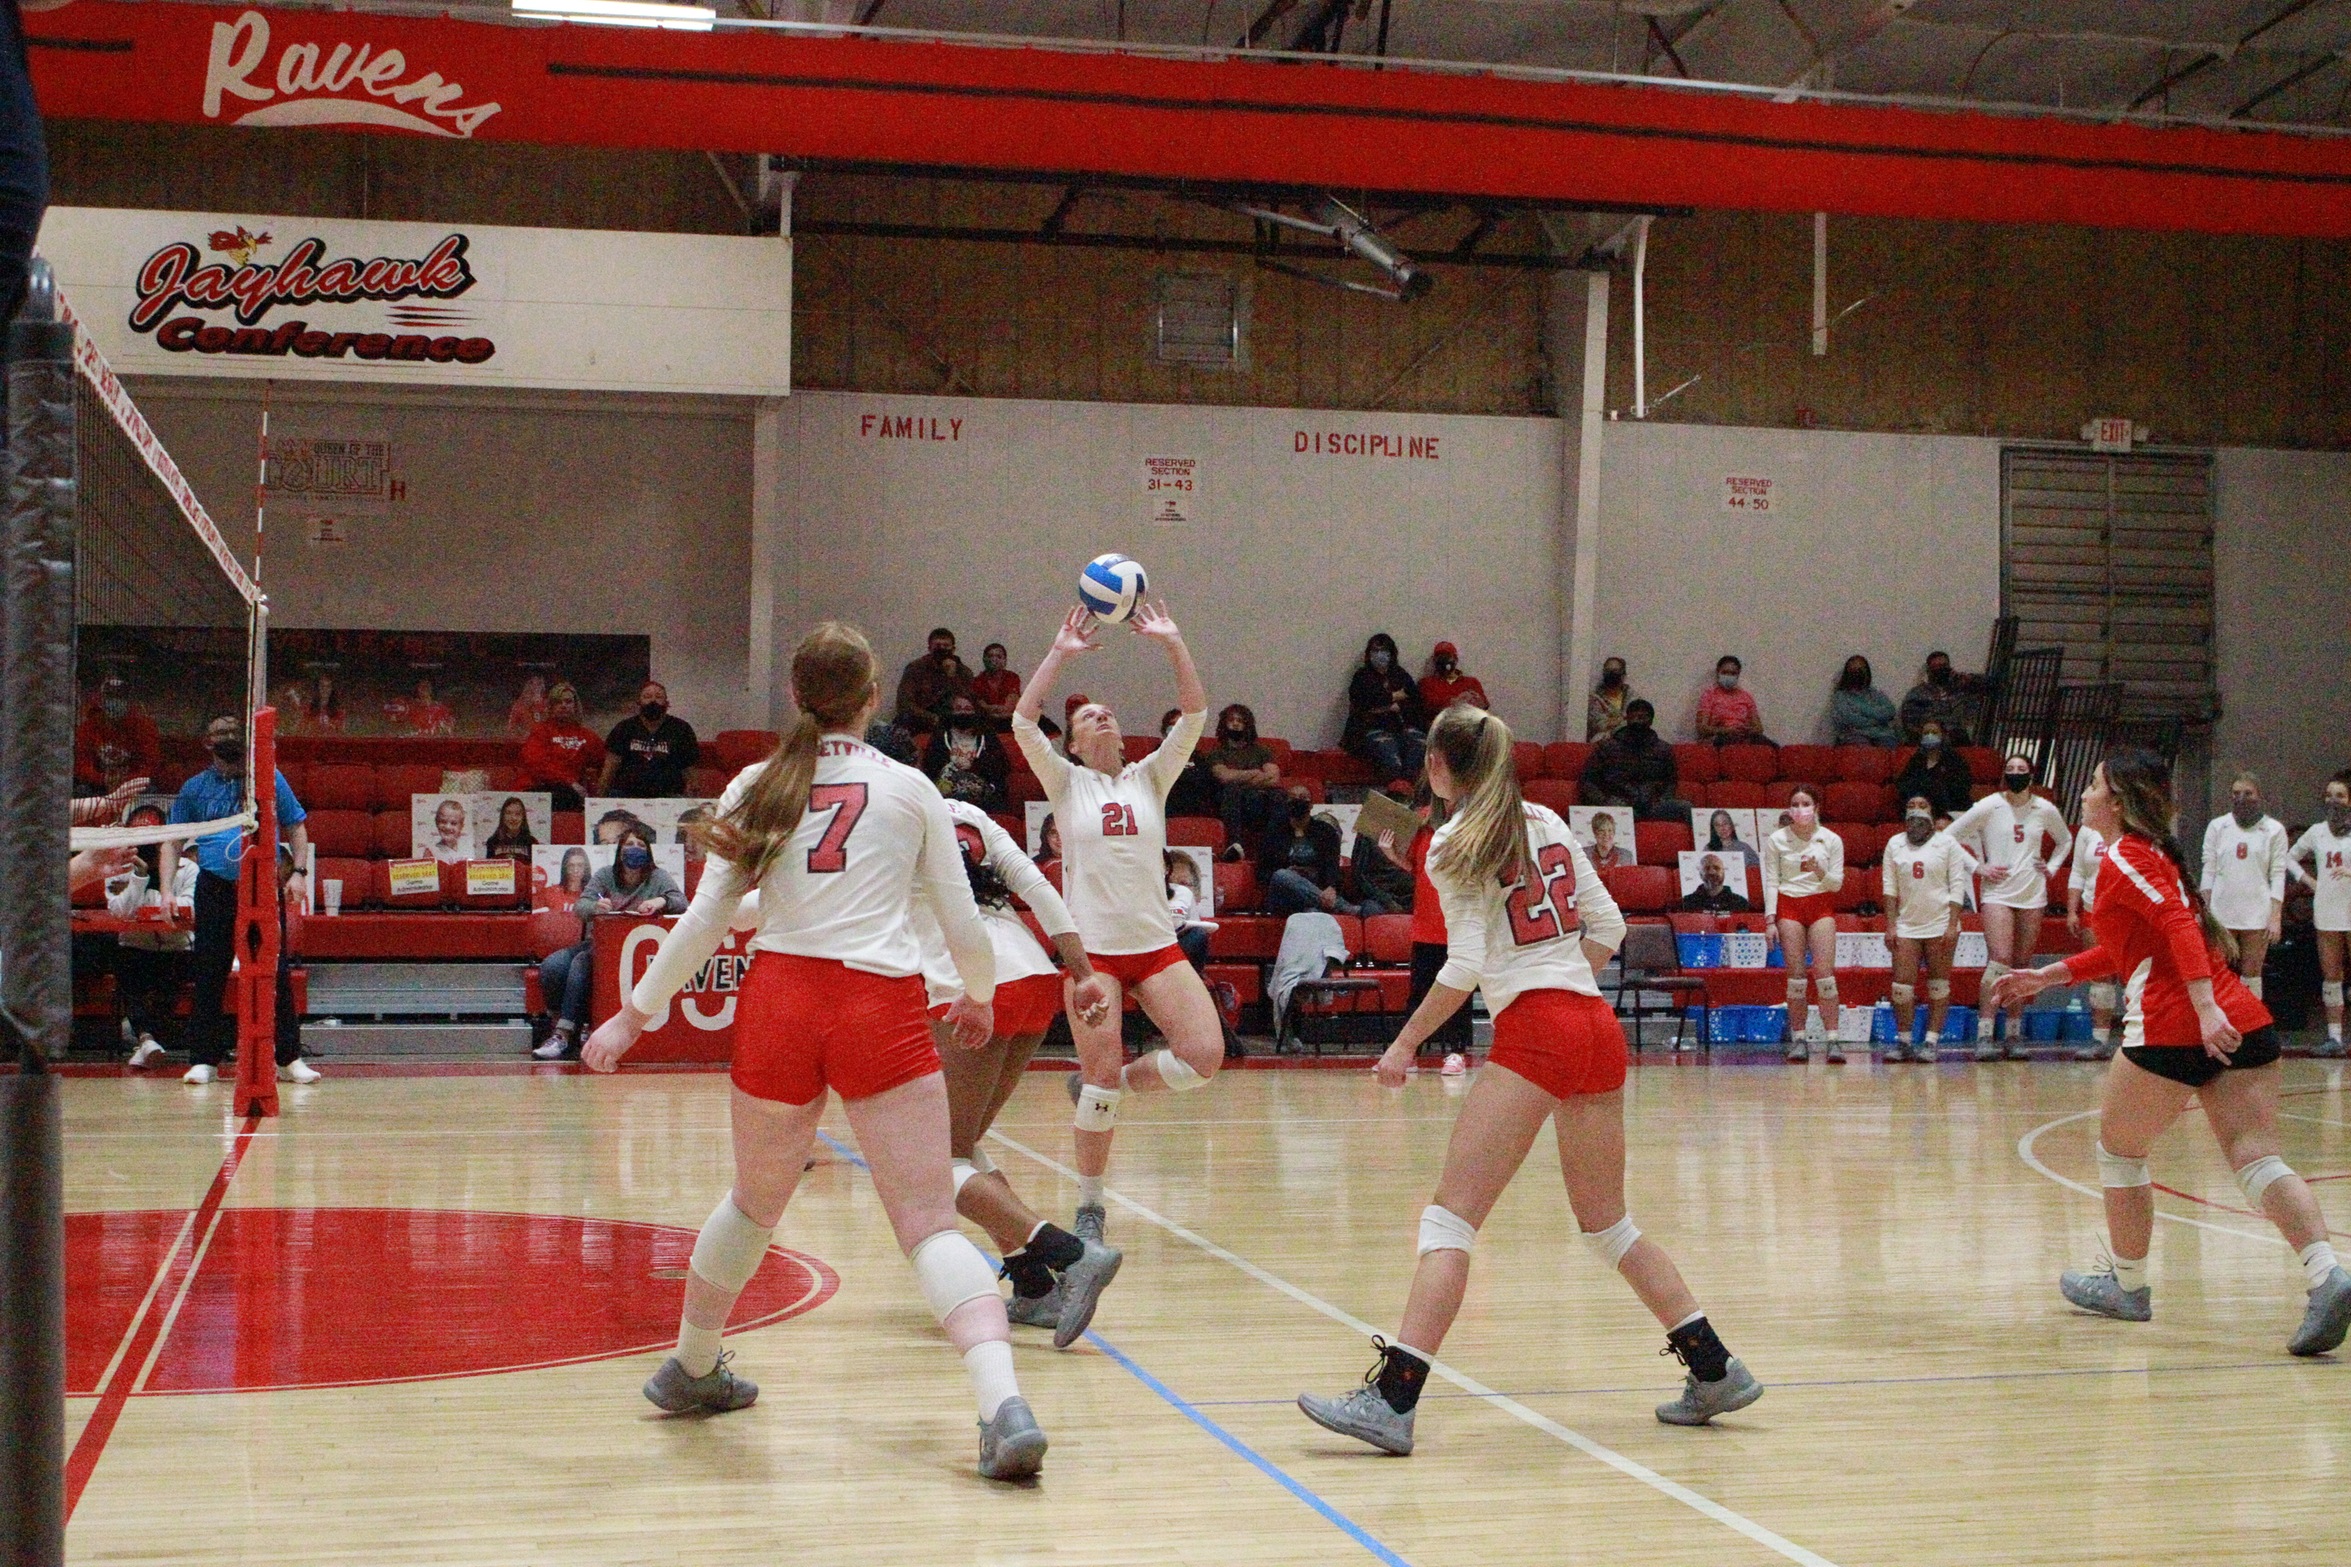 Red Raven Volleyball Wins Third in a Row with 3-1 Home Defeat of Neosho